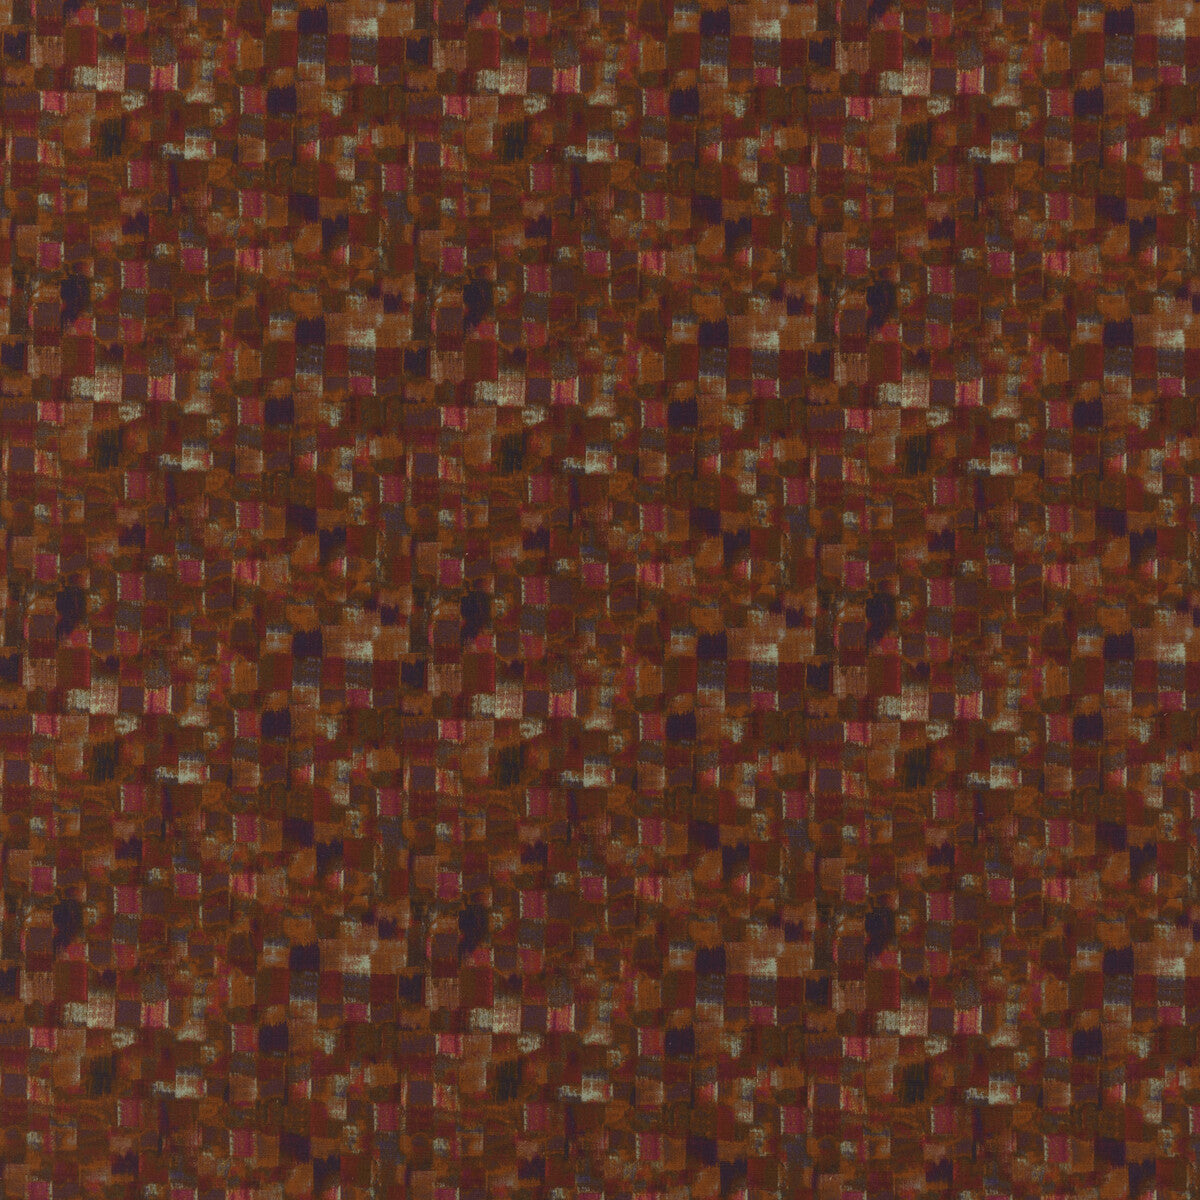 Ozone fabric in spice color - pattern ED75021.1.0 - by Threads in the Meridian collection